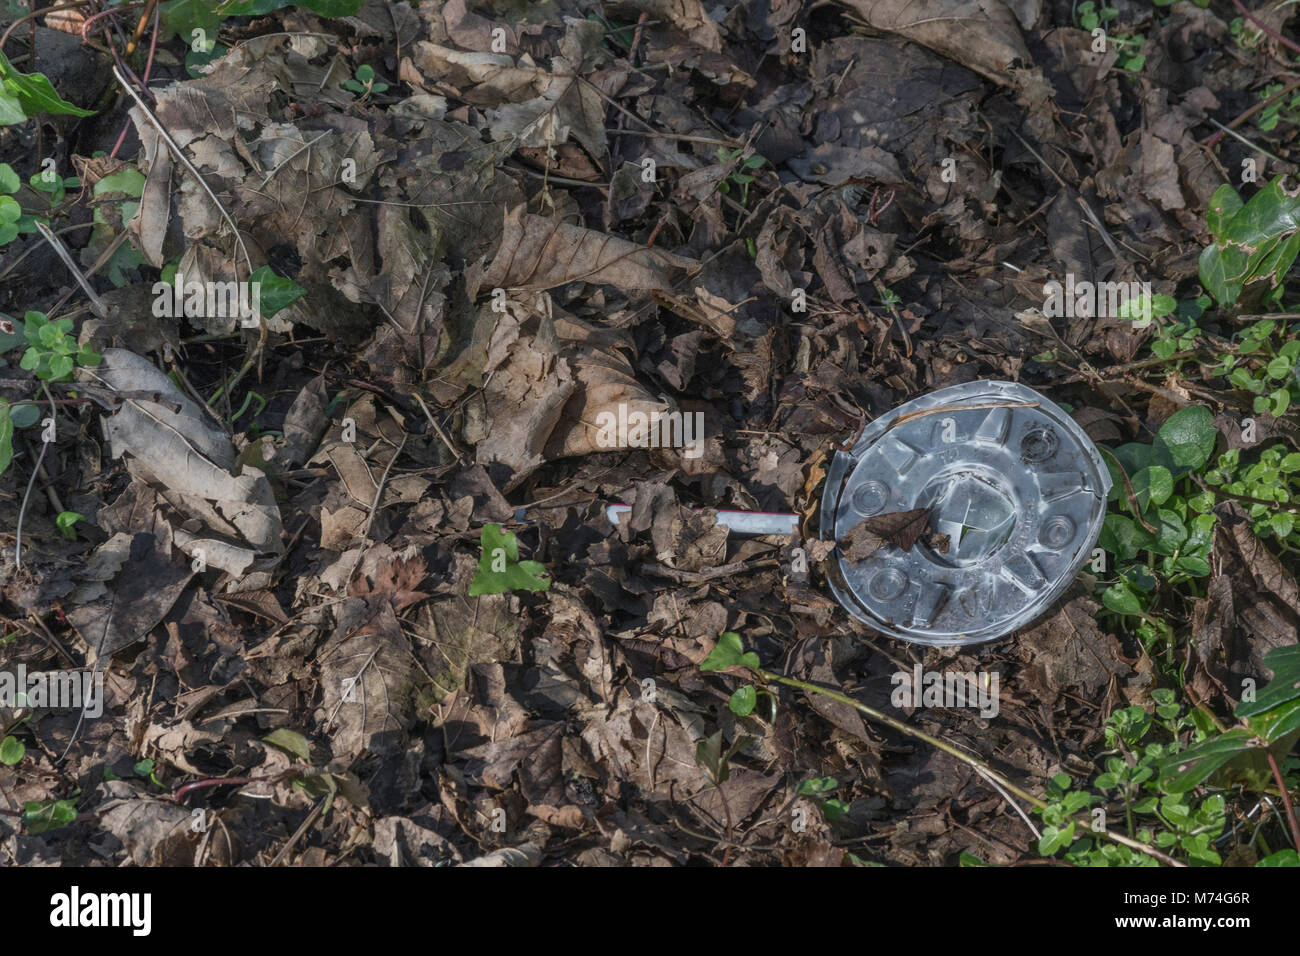 Everyday plastic items (plastic straw and cup lid) thrown into the environment as waste. Metaphor war on plastic, plastic rubbish. Stock Photo